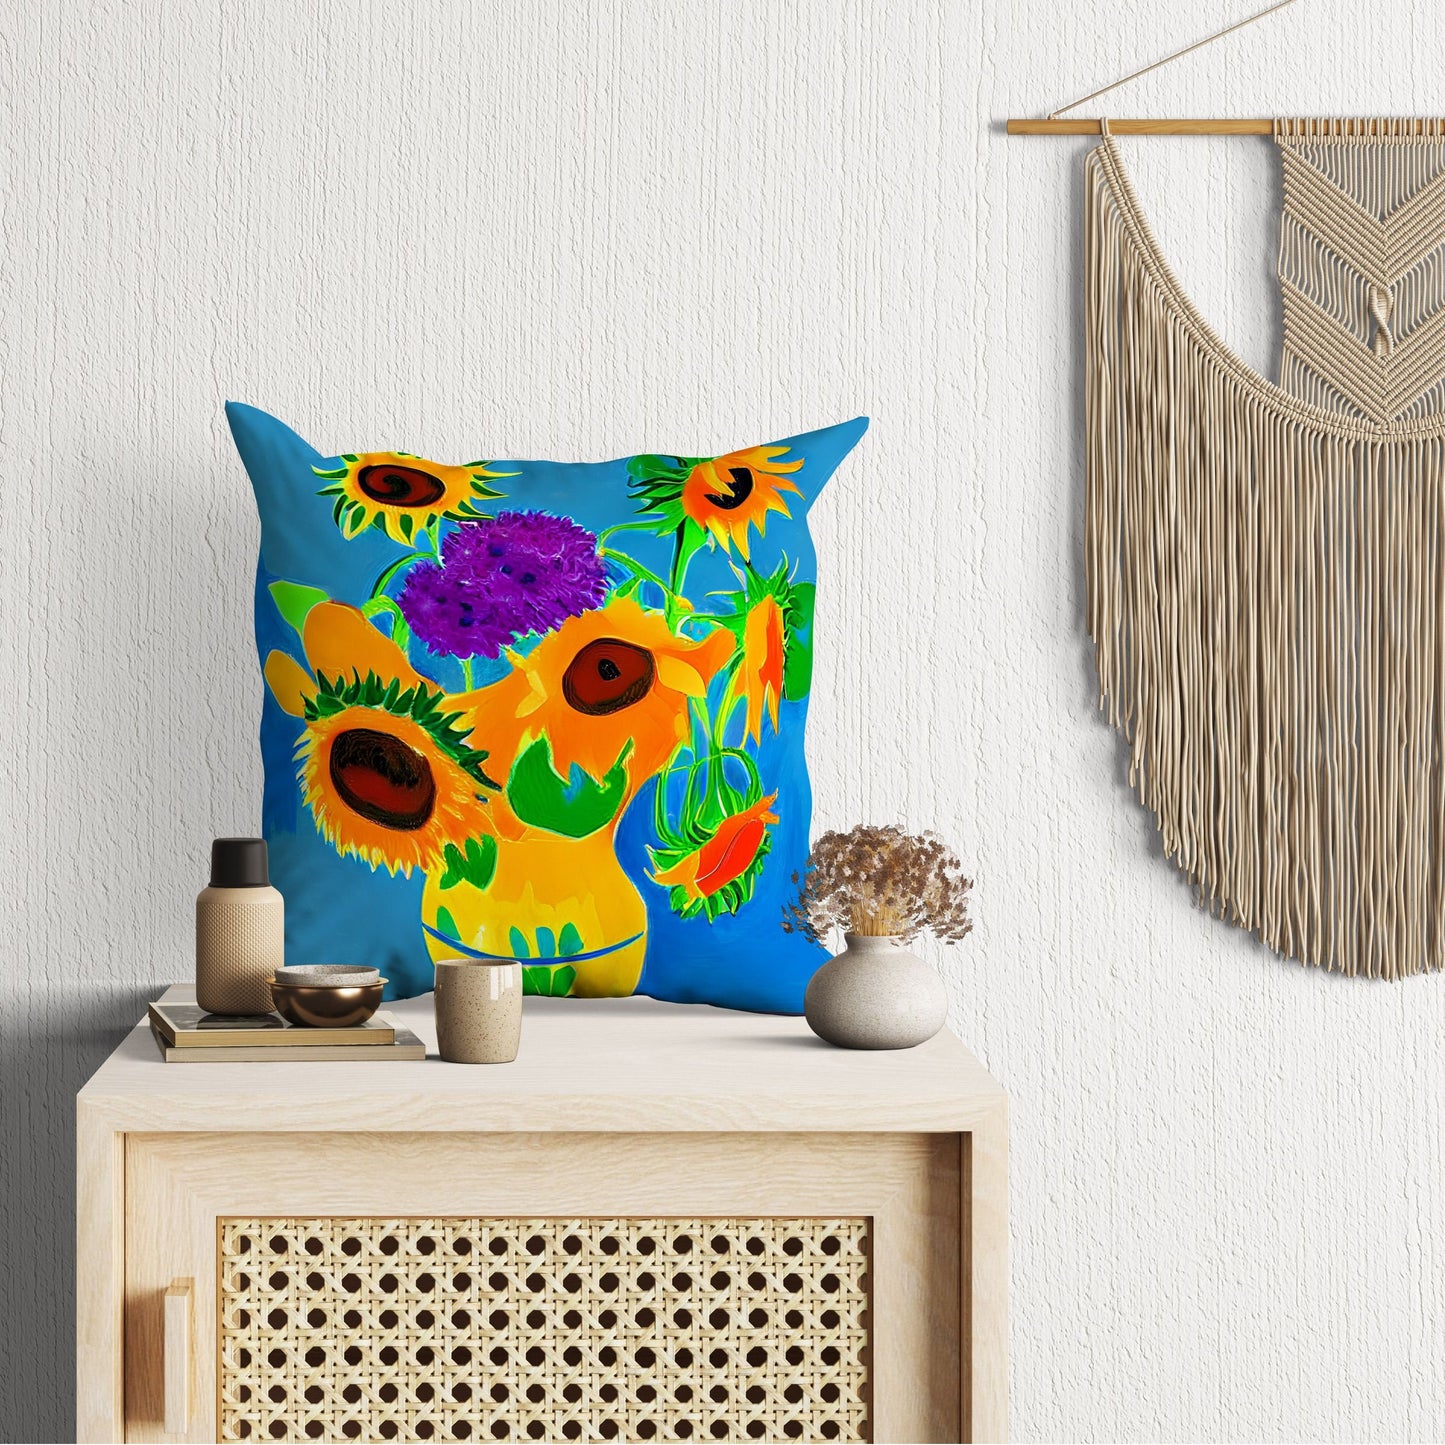 Sunflowers Decorative Pillow, Abstract Floral Pillow Covers, Artist Pillow, Colorful Pillow Case, Contemporary Pillow, 20X20 Pillow Cover